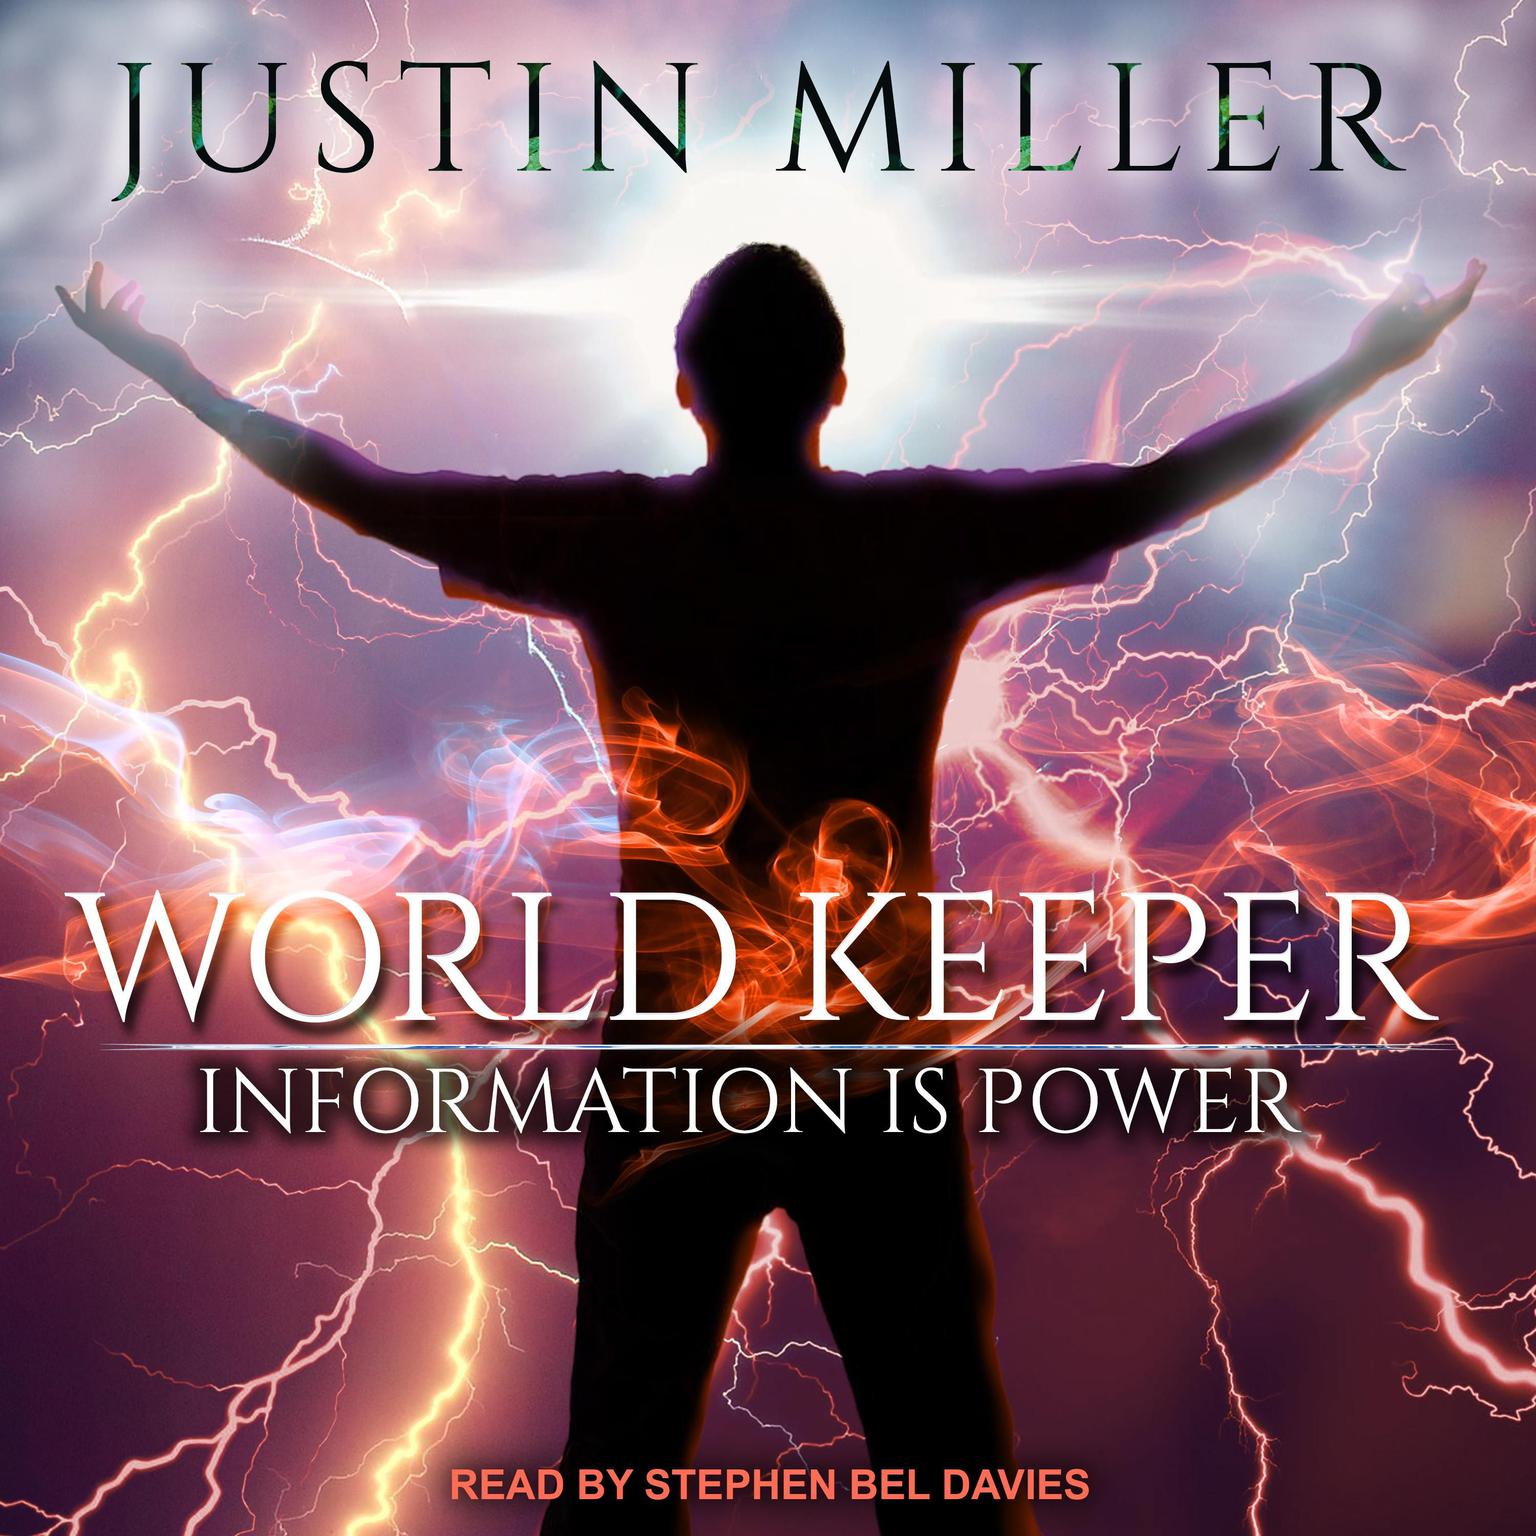 World Keeper: Information is Power Audiobook, by Justin Miller